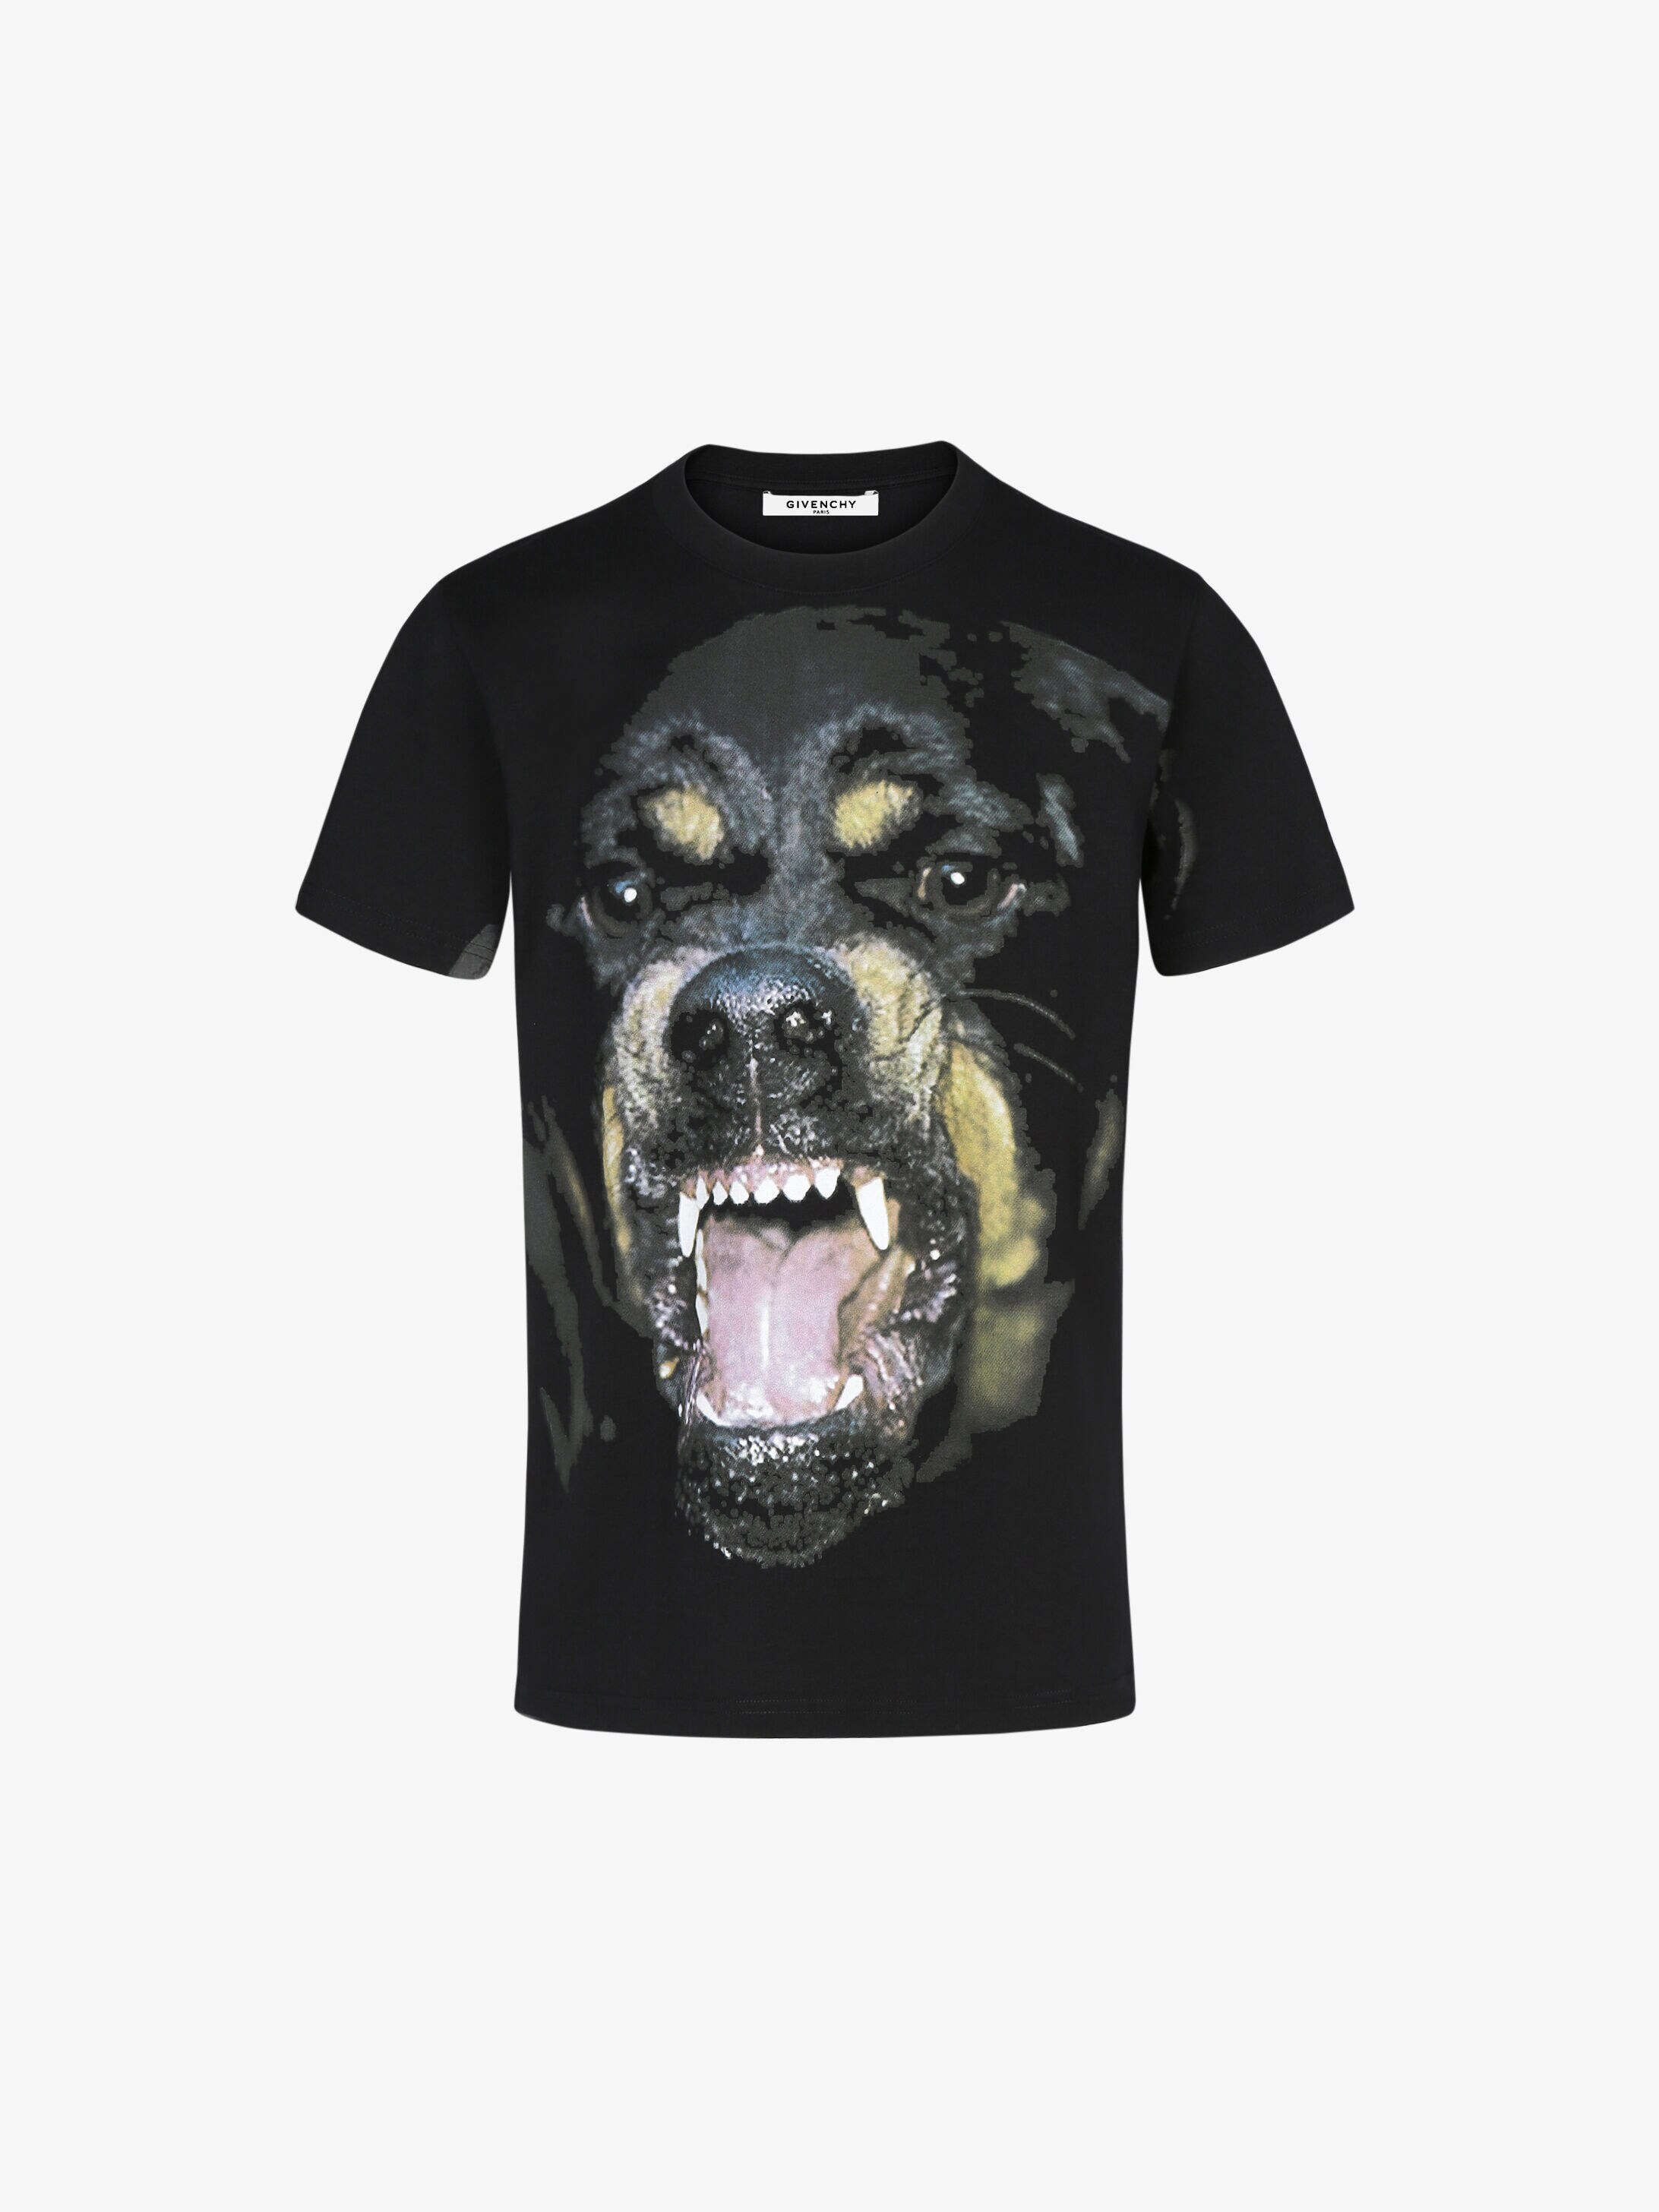 givenchy hoodie rottweiler